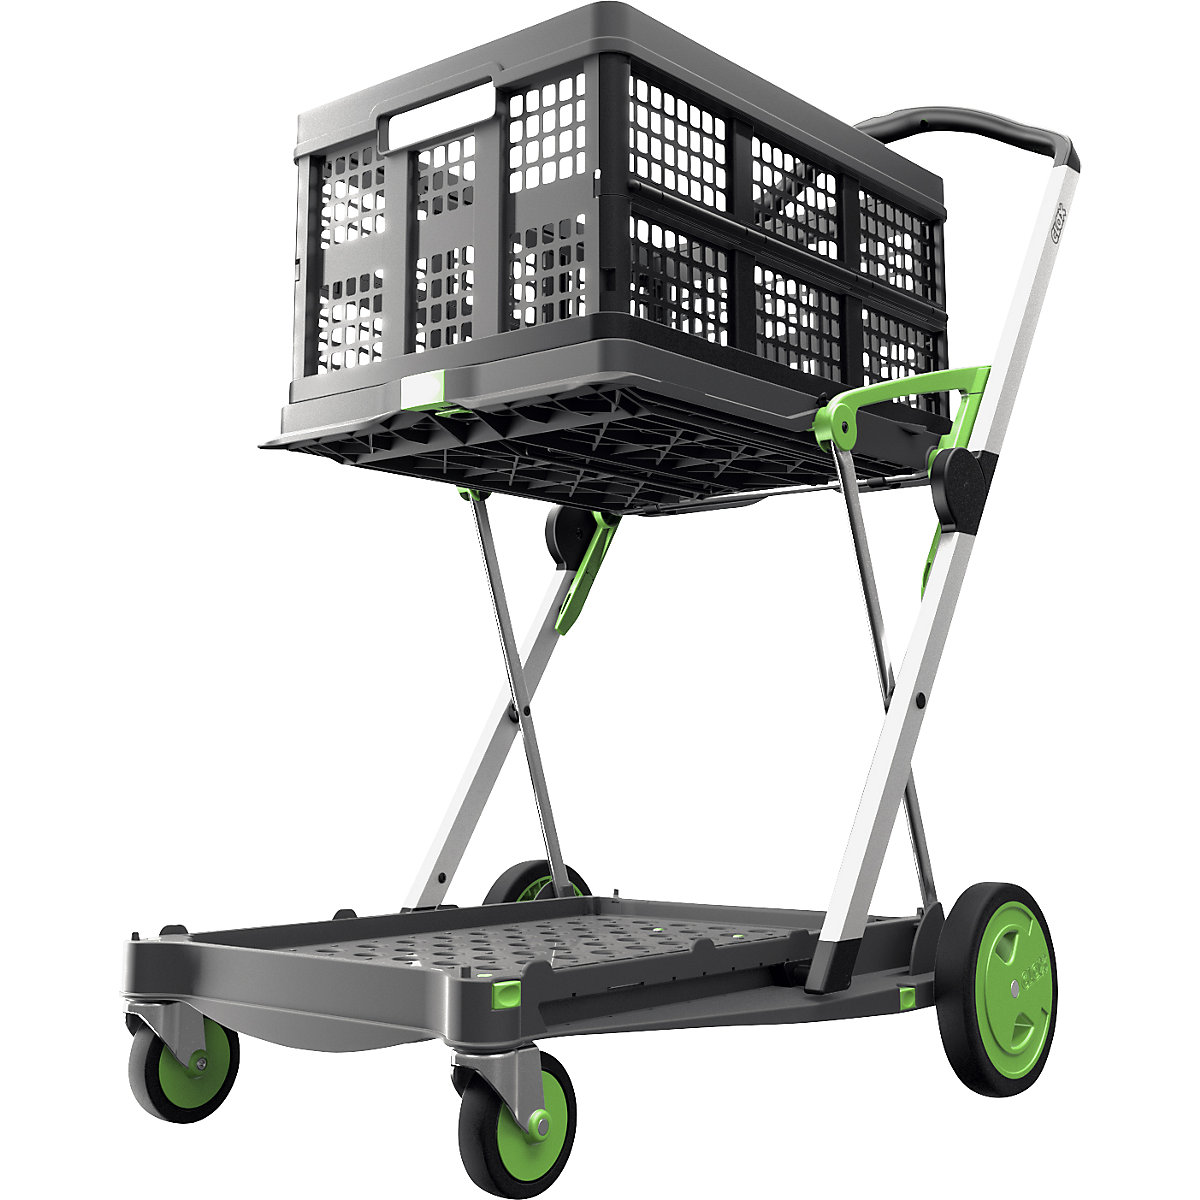 CLAX folding truck, with 46 l folding box, Green edition, 2+ items-2